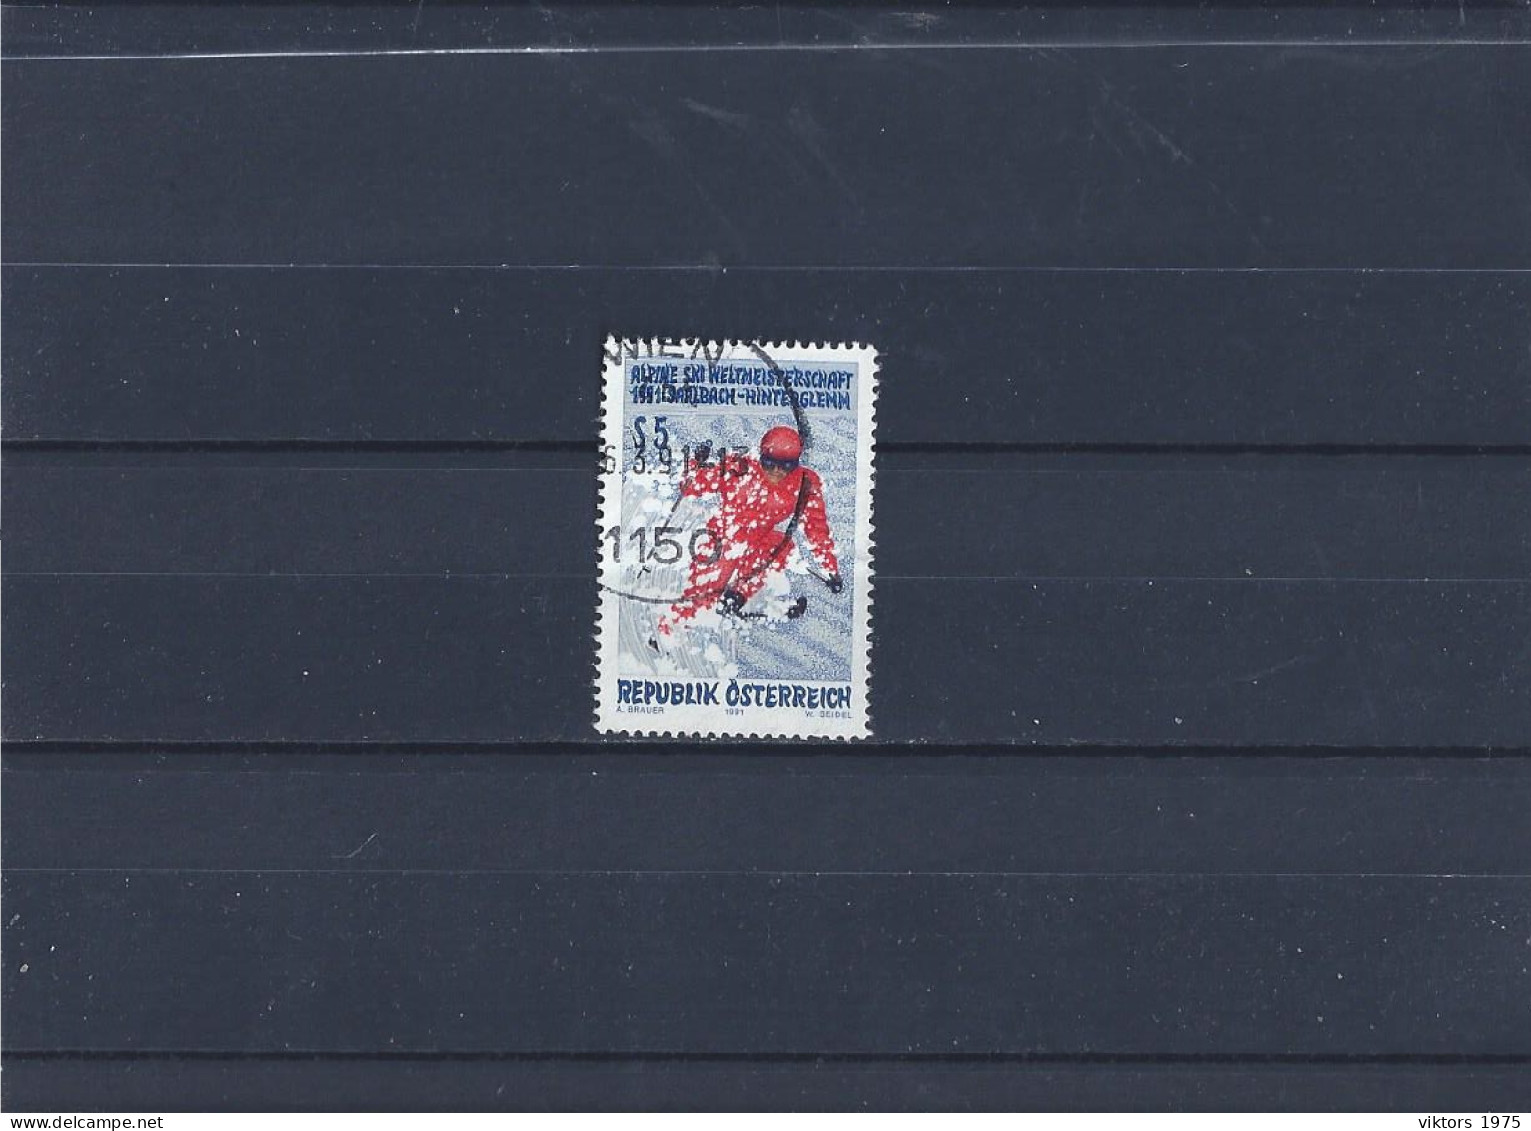 Used Stamp Nr.2014 In MICHEL Catalog - Used Stamps